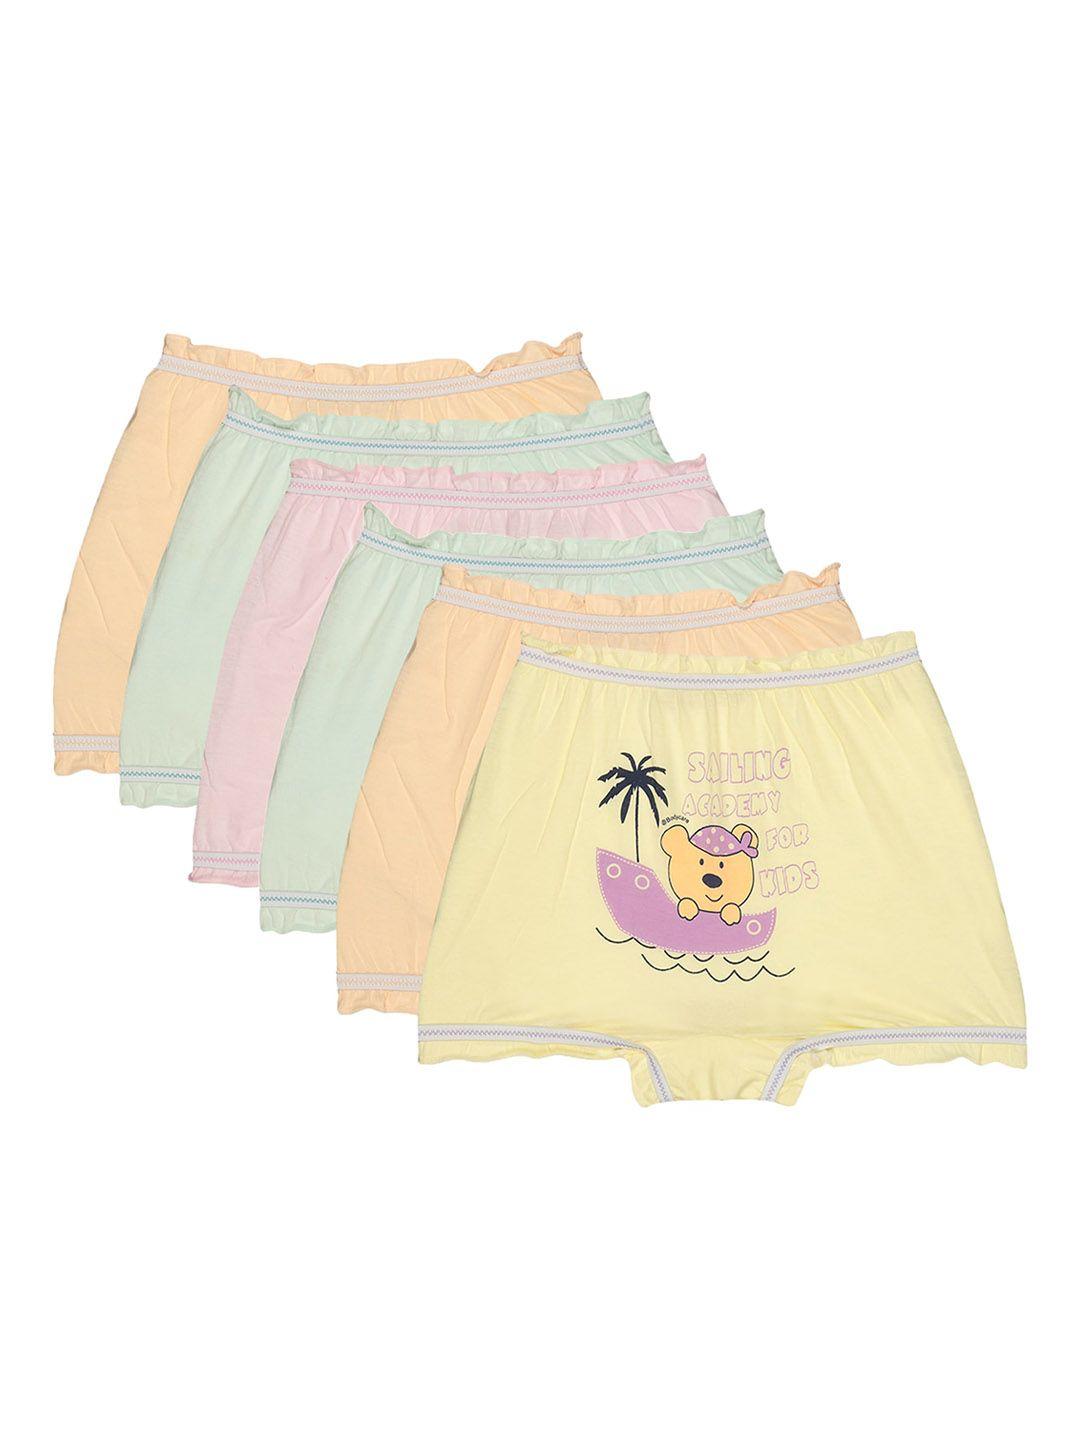 dyca kids pack of 6 assorted cotton boxer style briefs dia705-pk005_p6